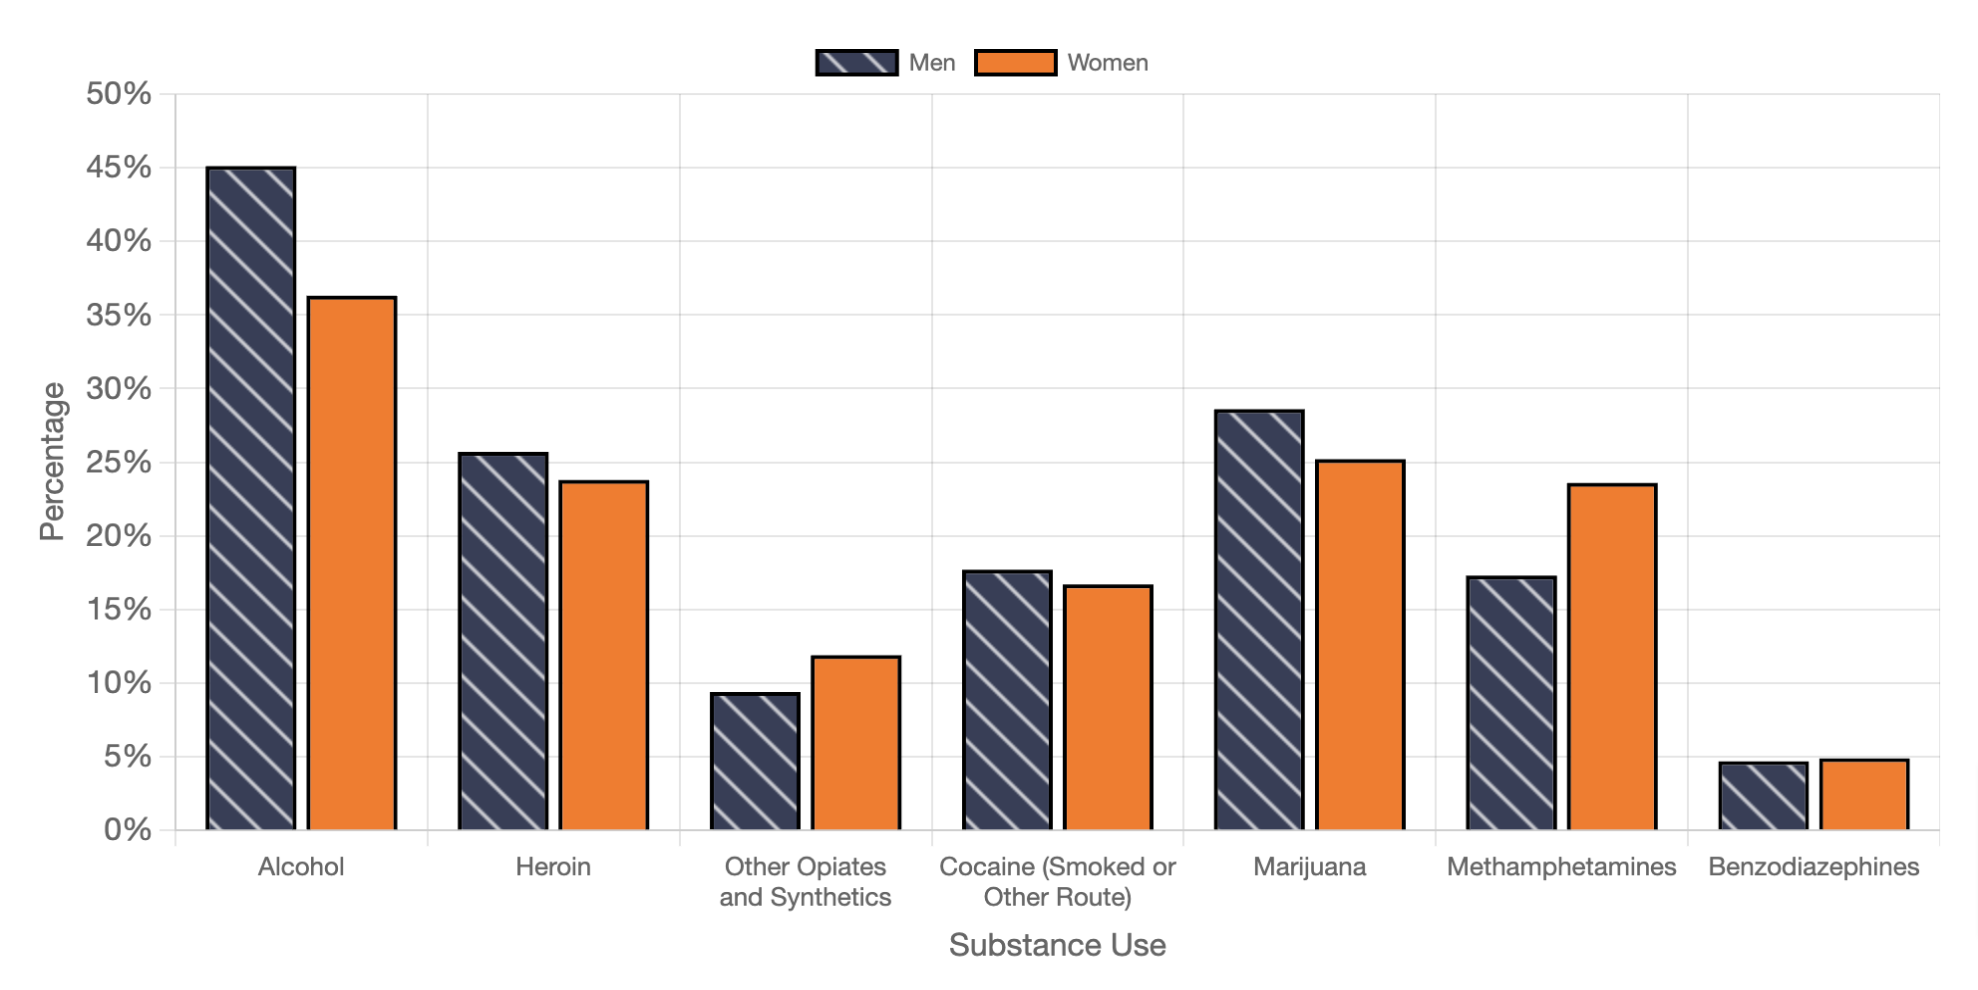 Substance Abuse Treatment Admissions by Substance Use Flag and Gender in the United States, 2020*